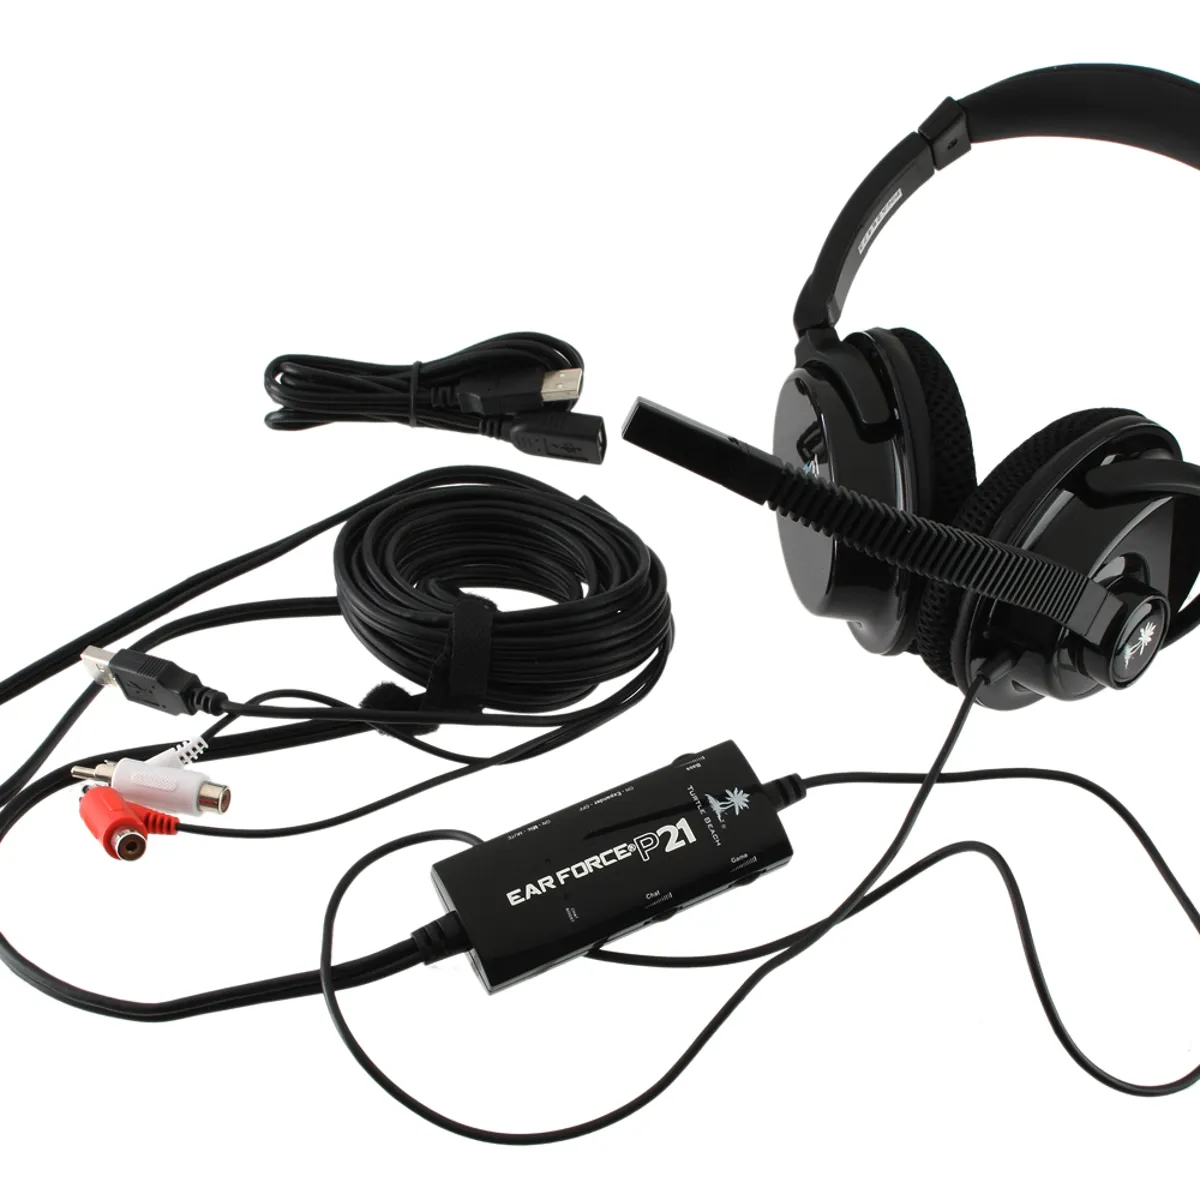 Ear Force DPX 21